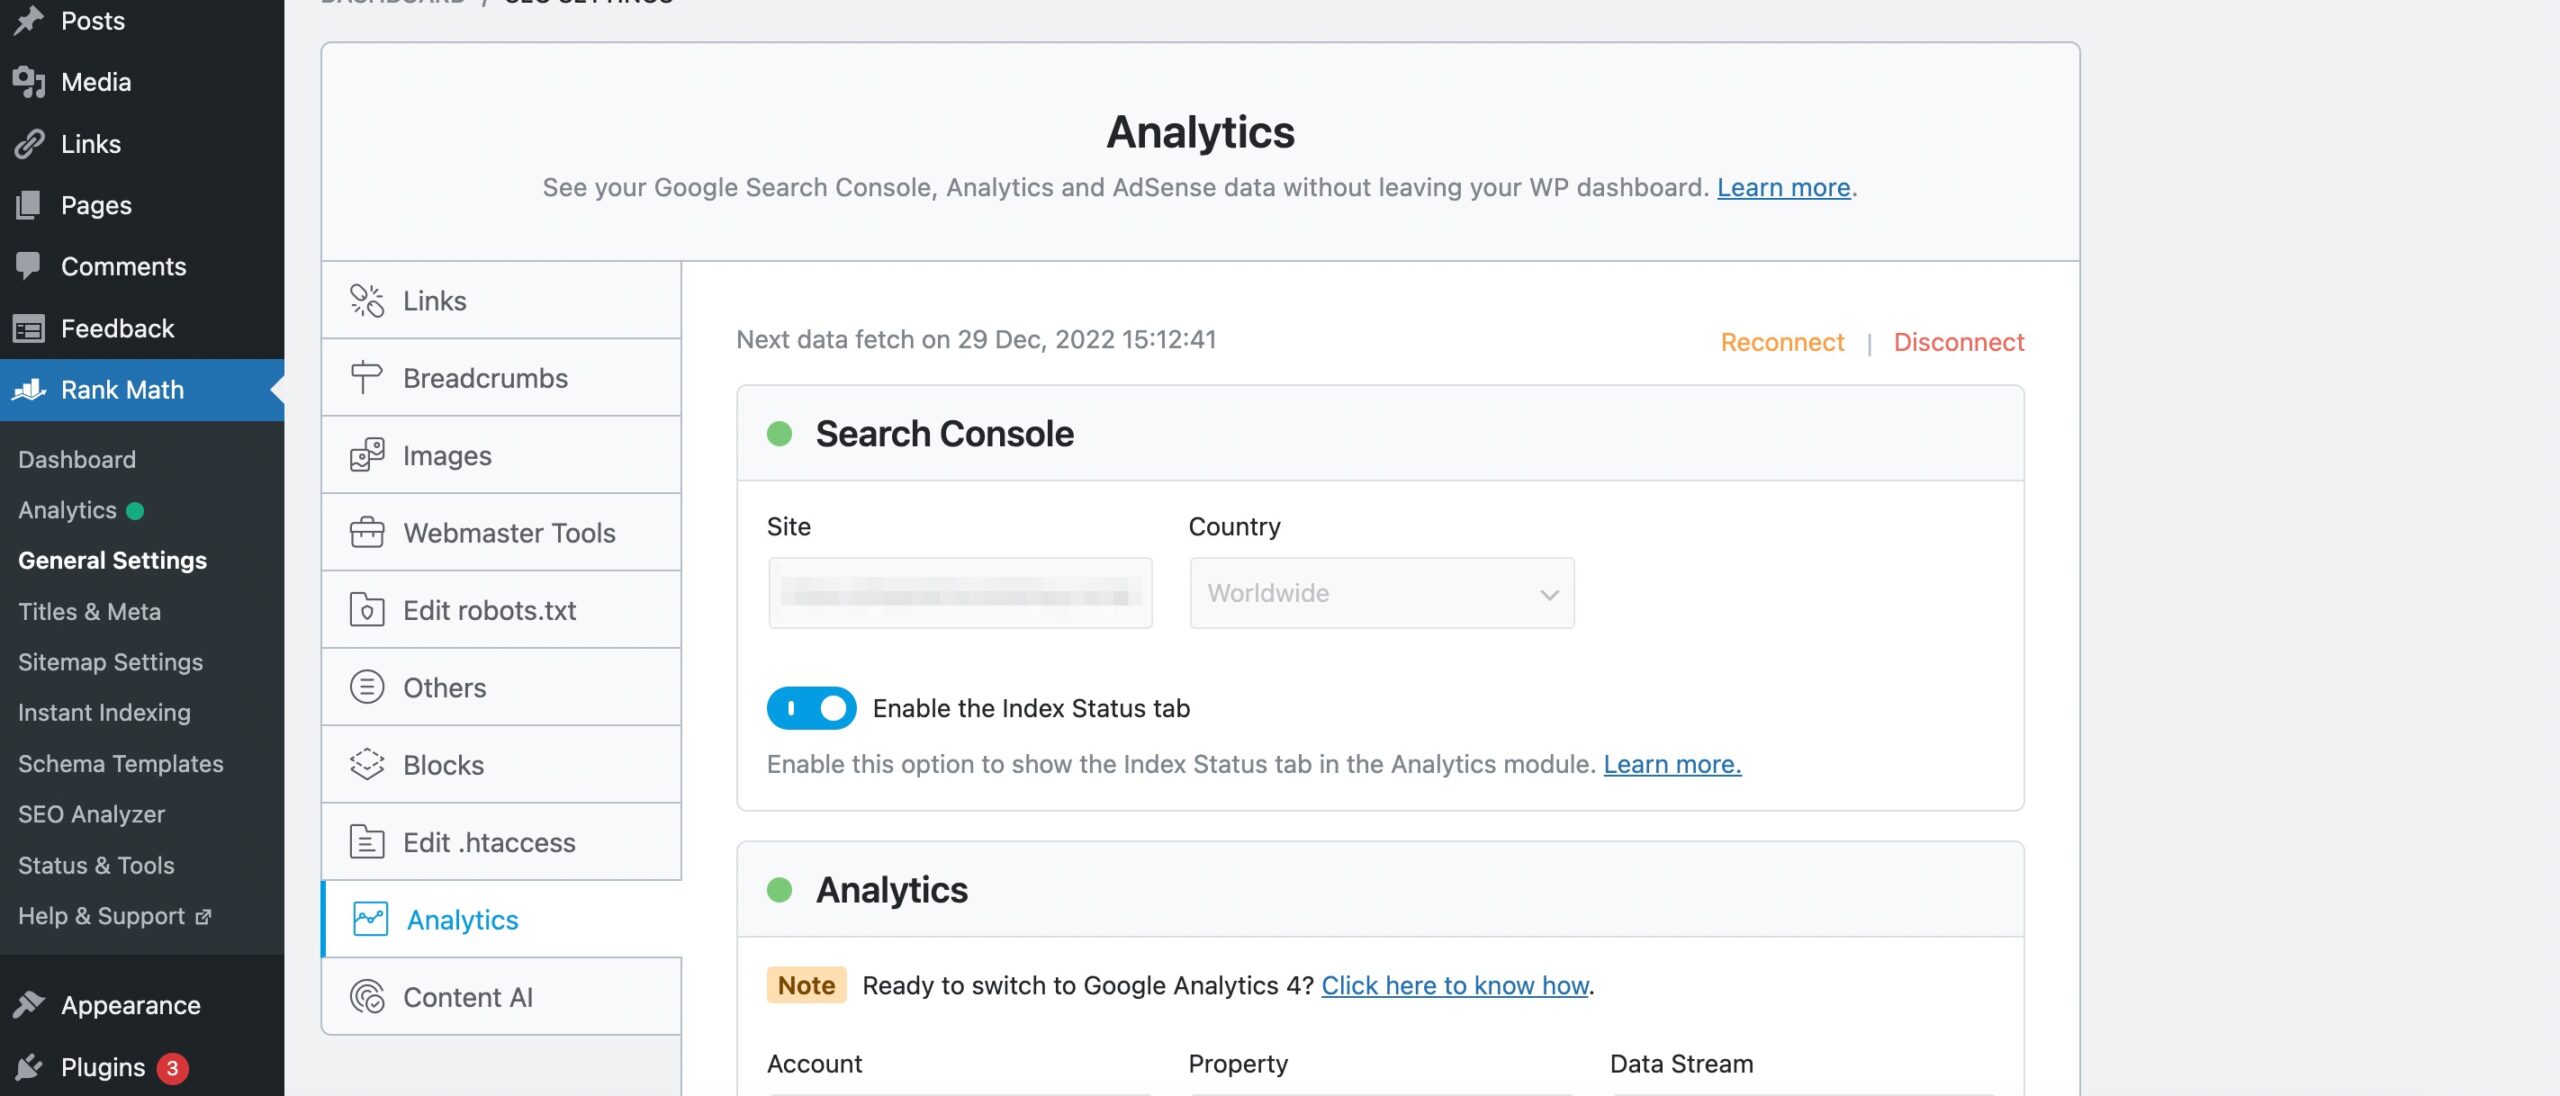 Search Console connected in Rank Math